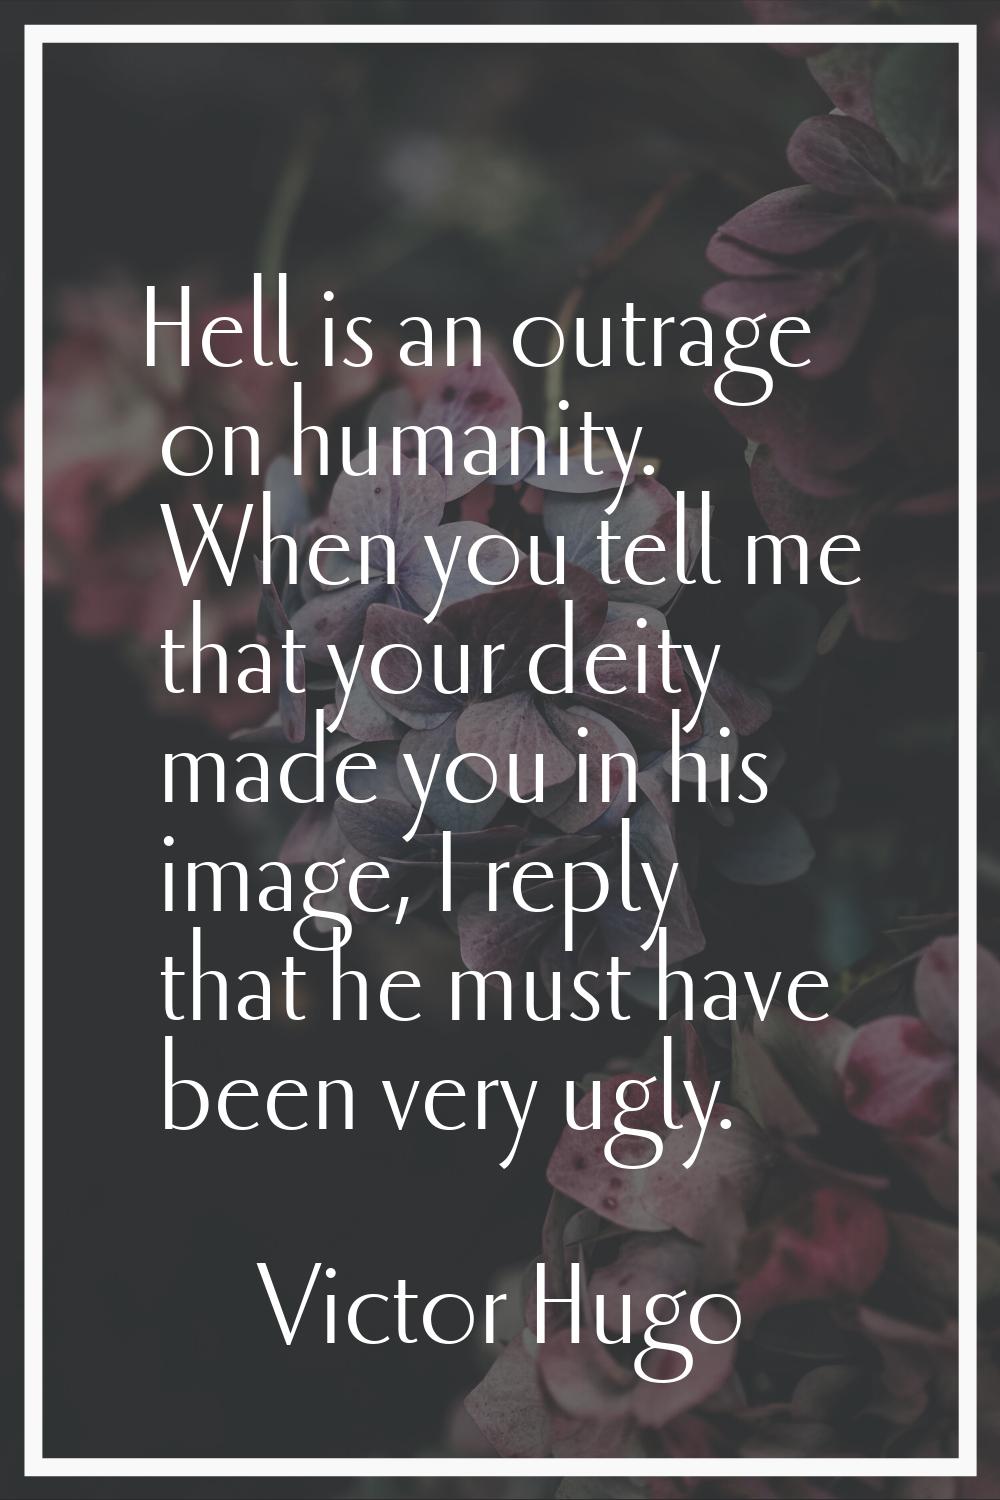 Hell is an outrage on humanity. When you tell me that your deity made you in his image, I reply tha